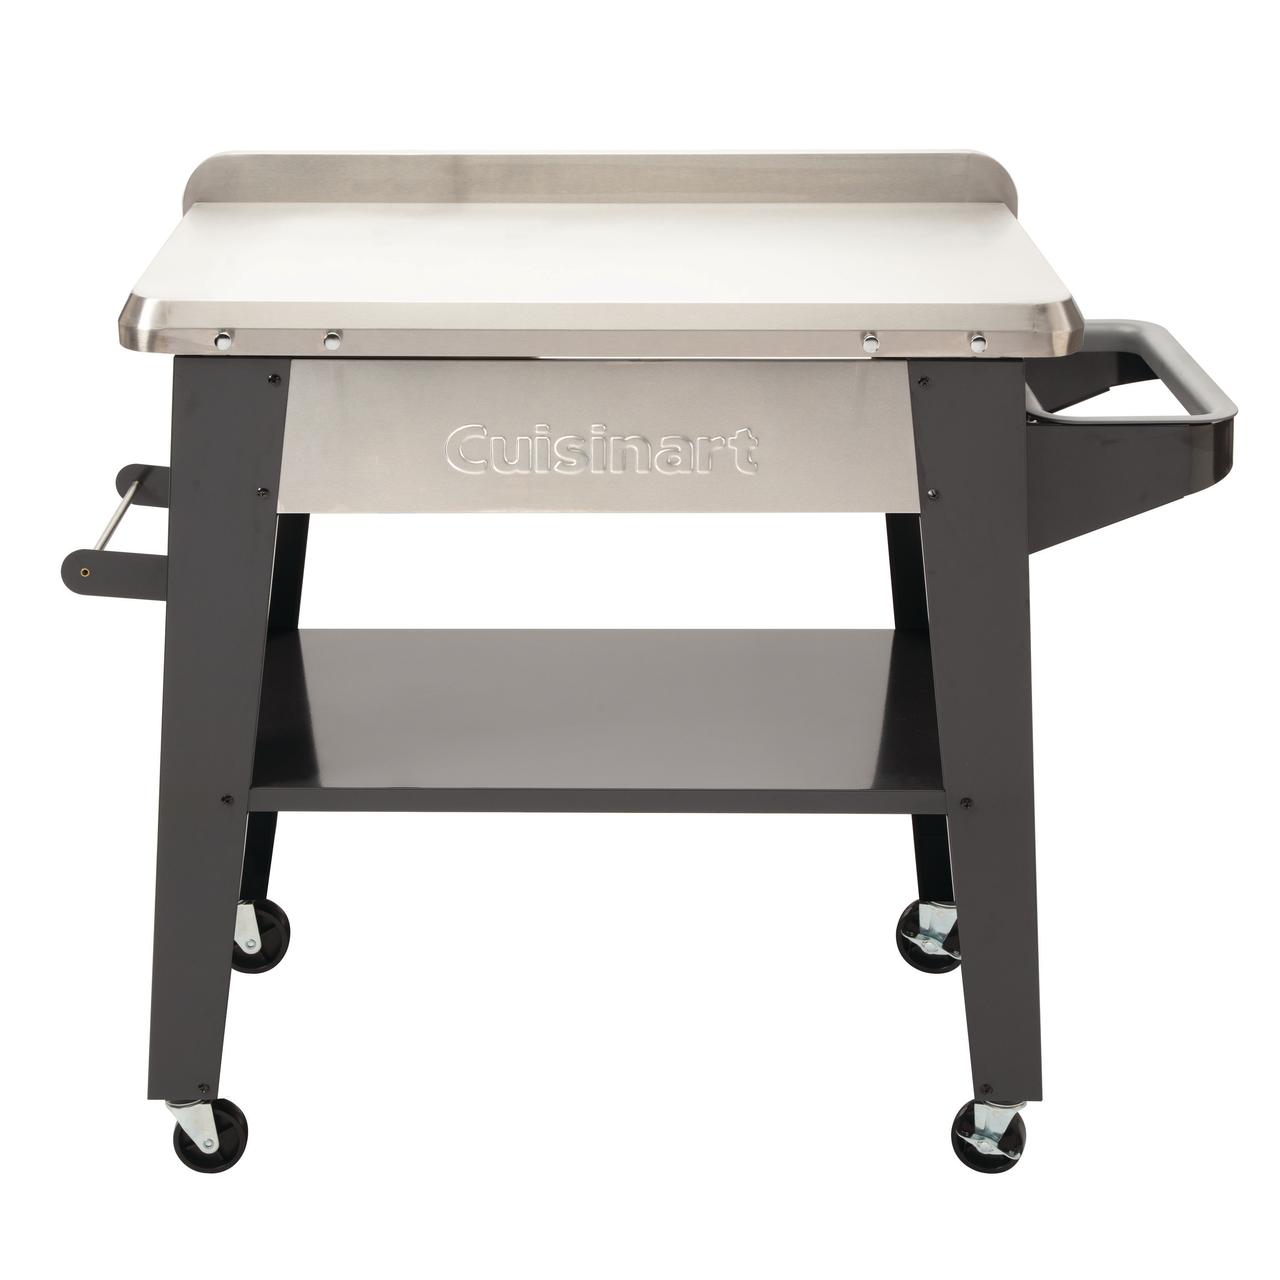 Cuisinart Stainless Steel Outdoor Prep Table - image 1 of 8